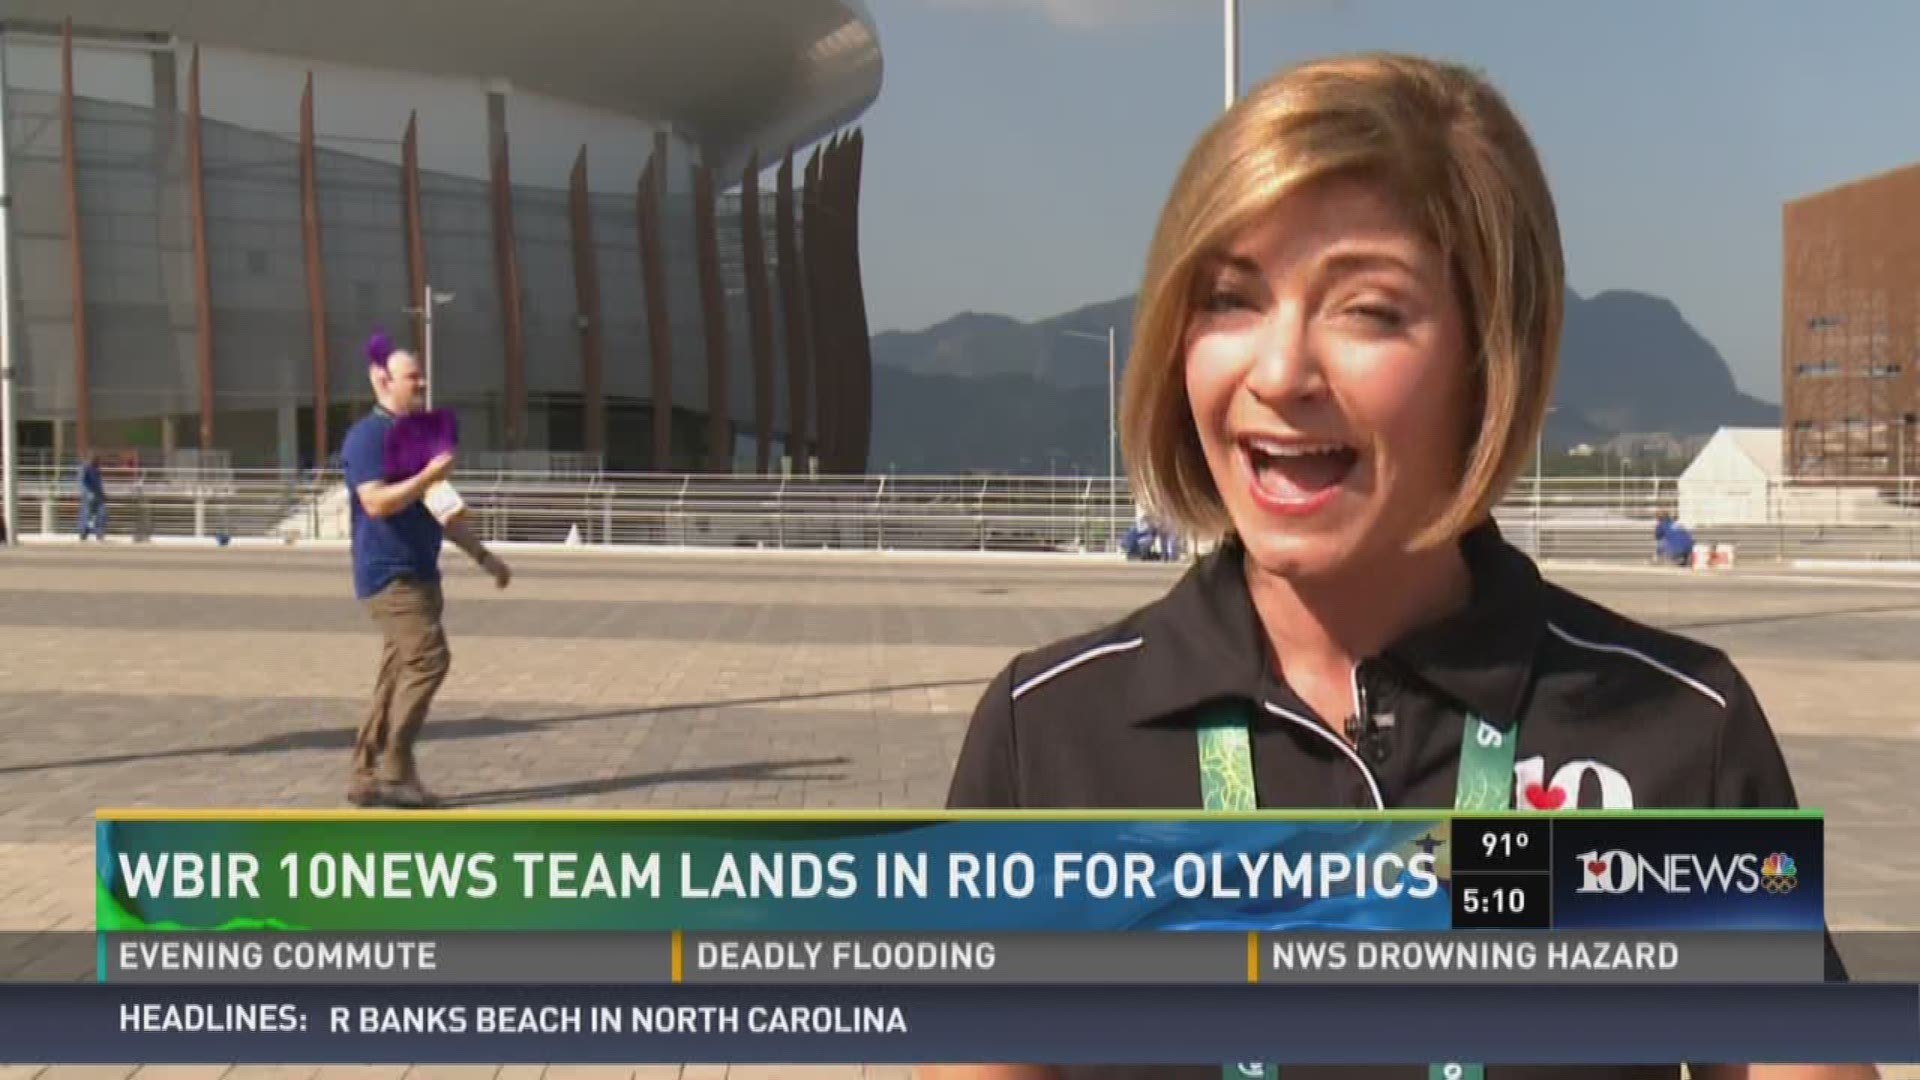 WBIR's Robin Wilhoit and Jim Matheny are ready to cover the Olympic Summer games in Rio.